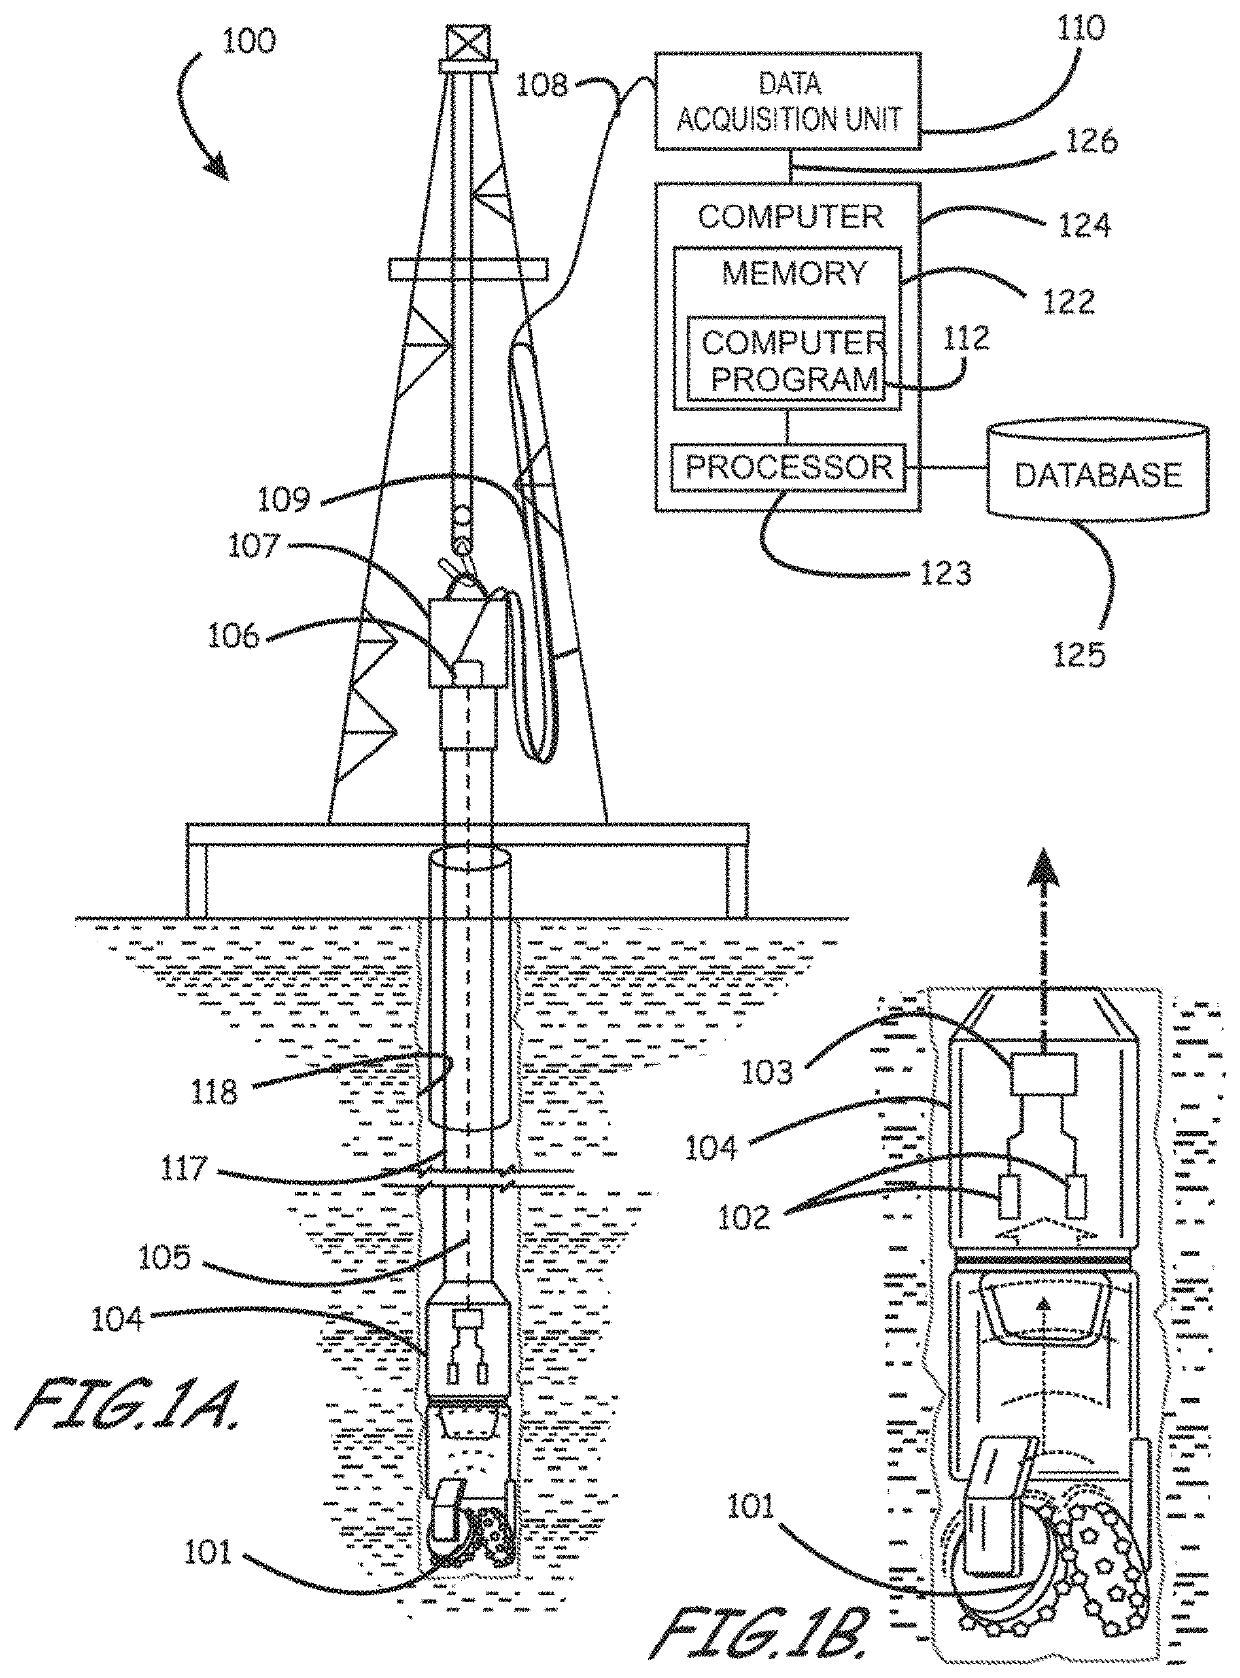 Apparatus and methods of evaluating rock properties while drilling using acoustic sensors installed in the drilling fluid circulation system of a drilling rig